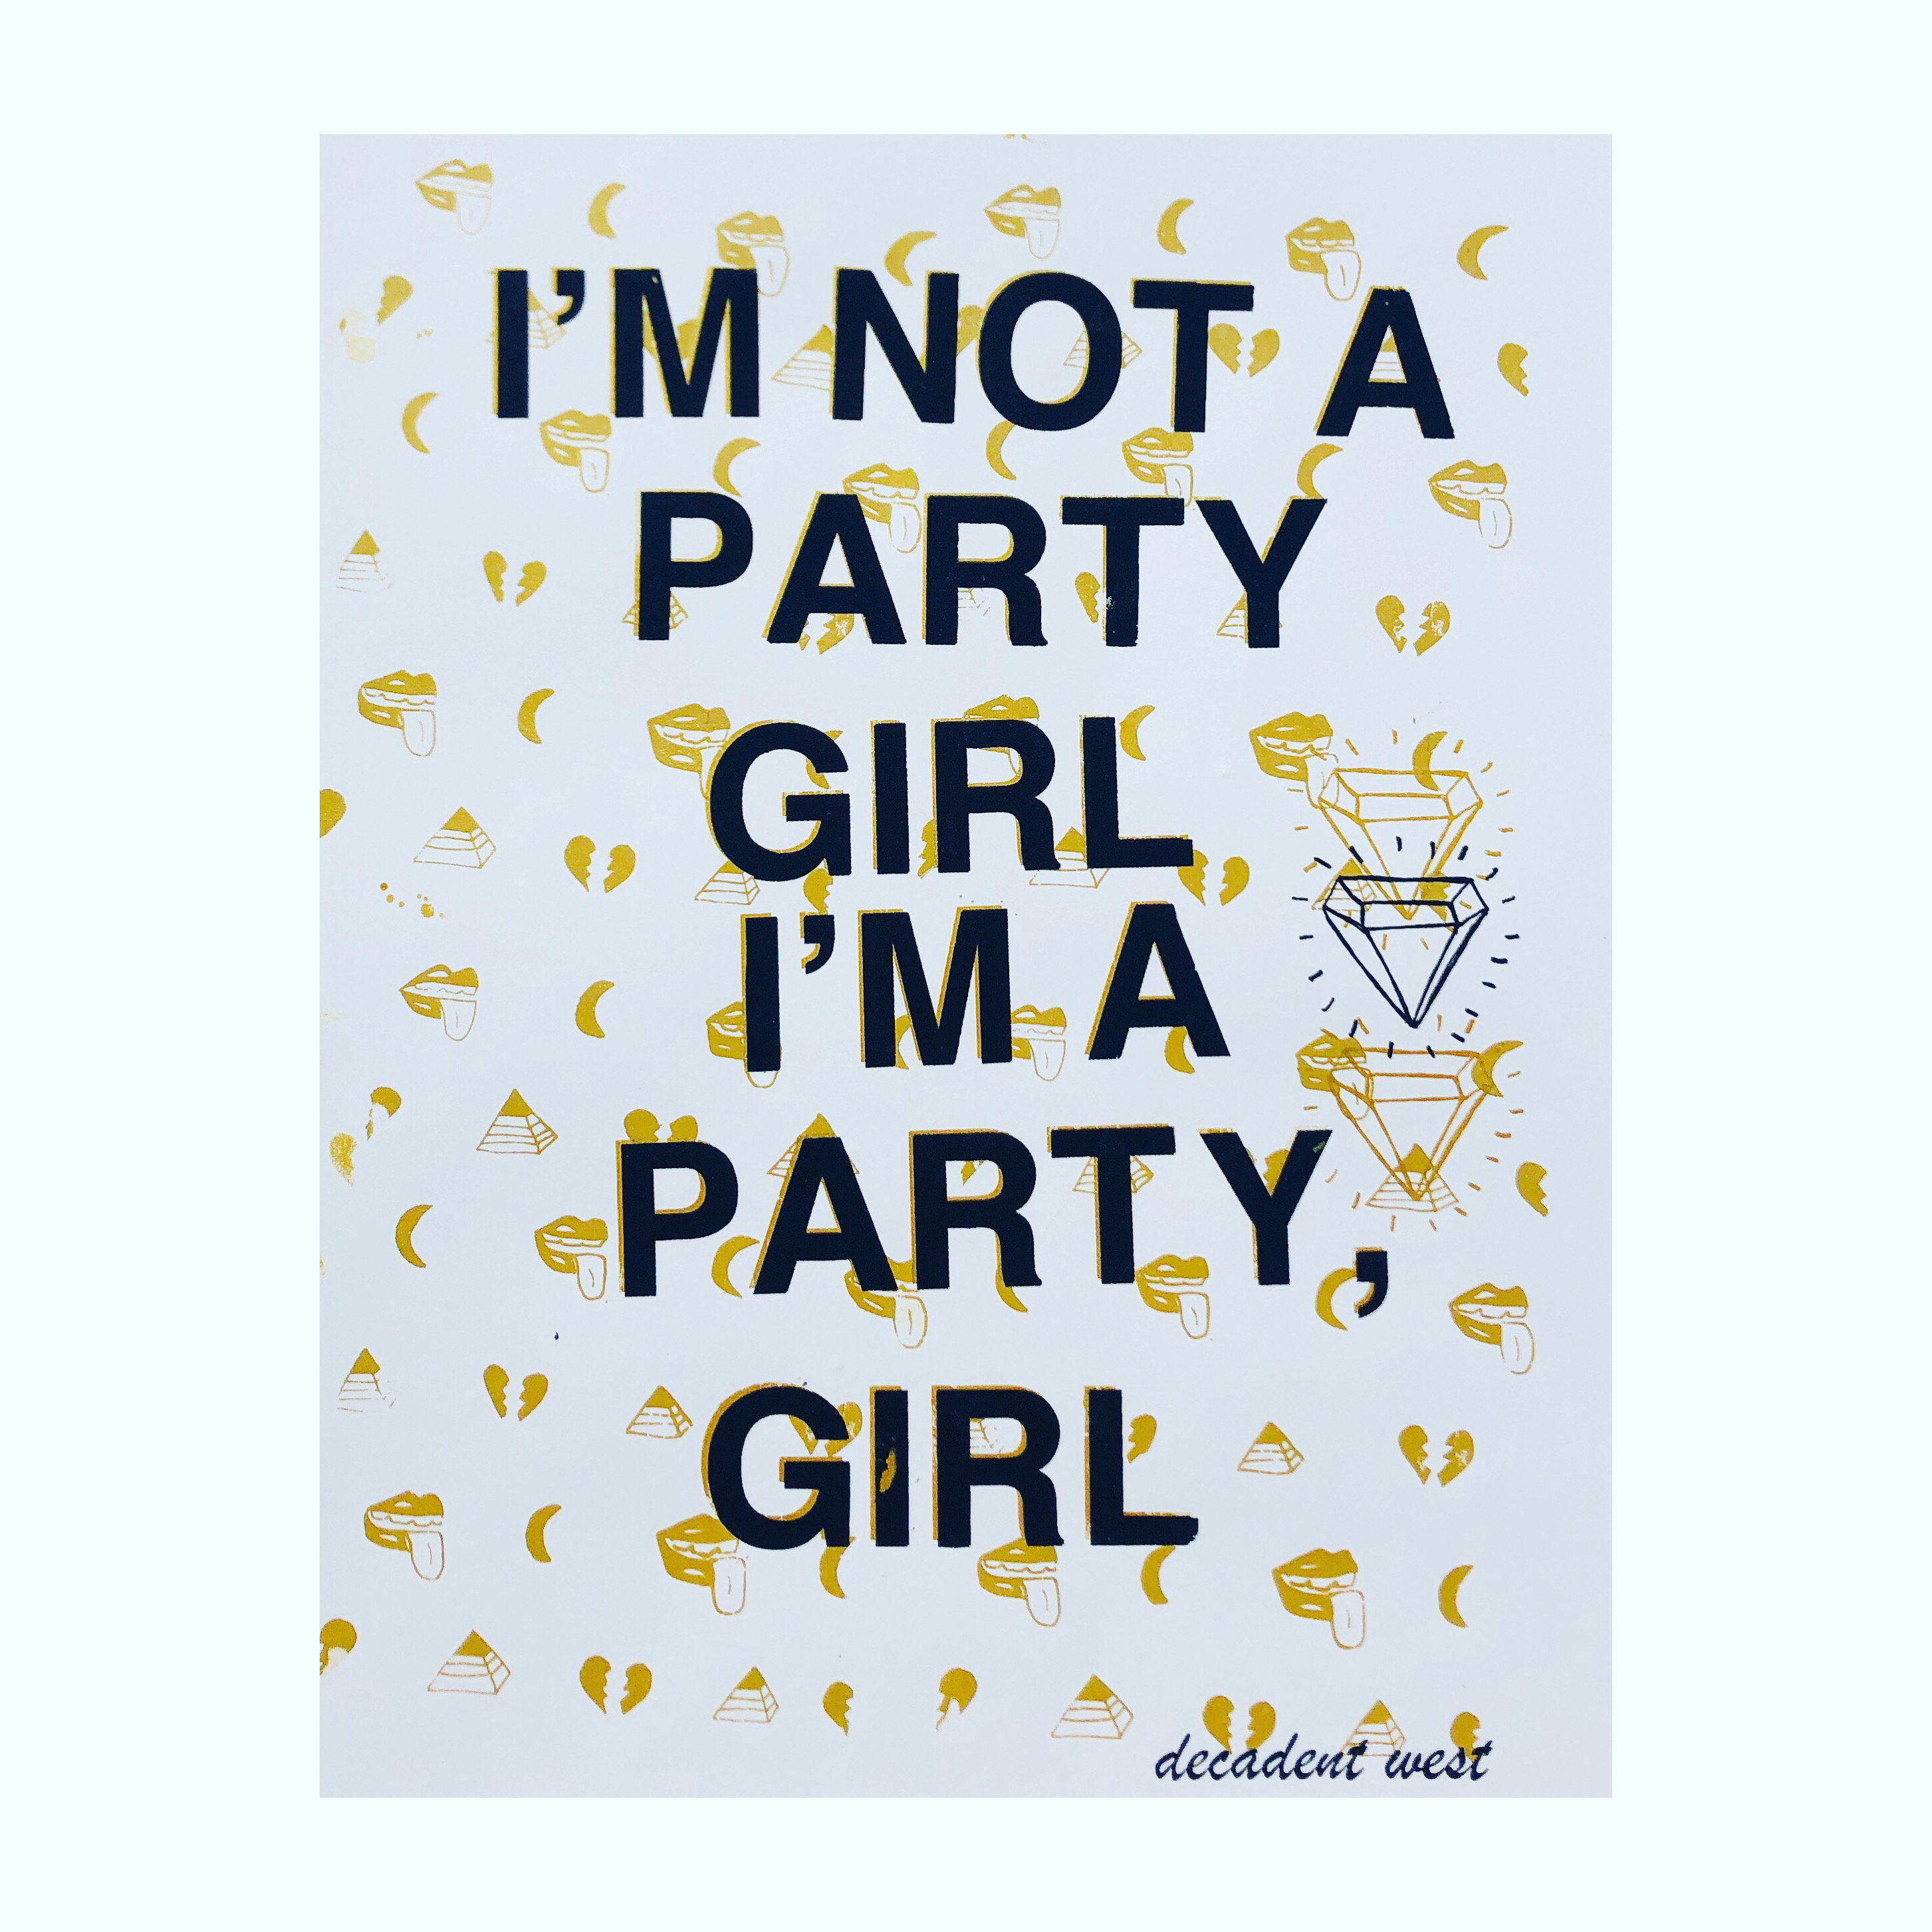 print with text "Im not a party girl, Im a party girl